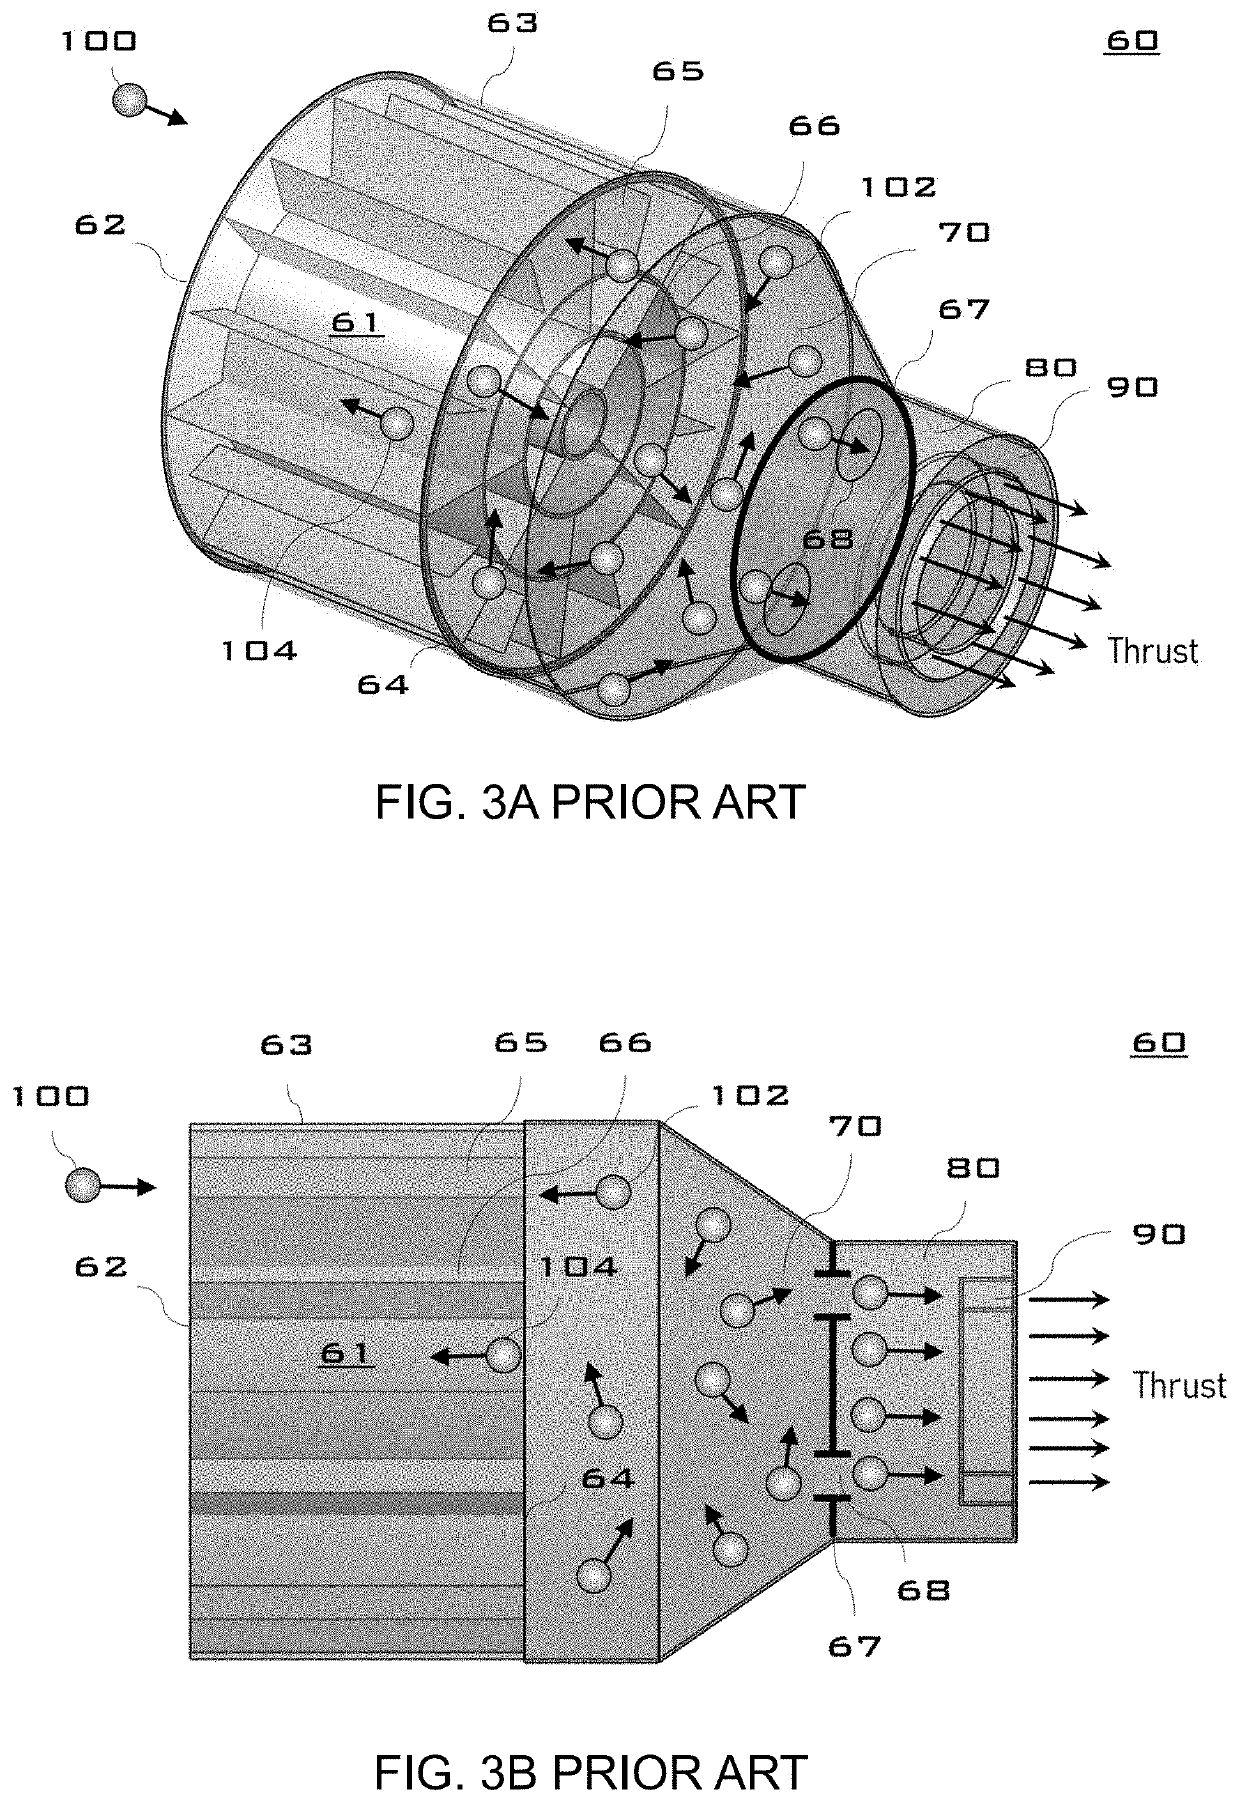 Intake system for an atmosphere breathing electric thruster for a spacecraft